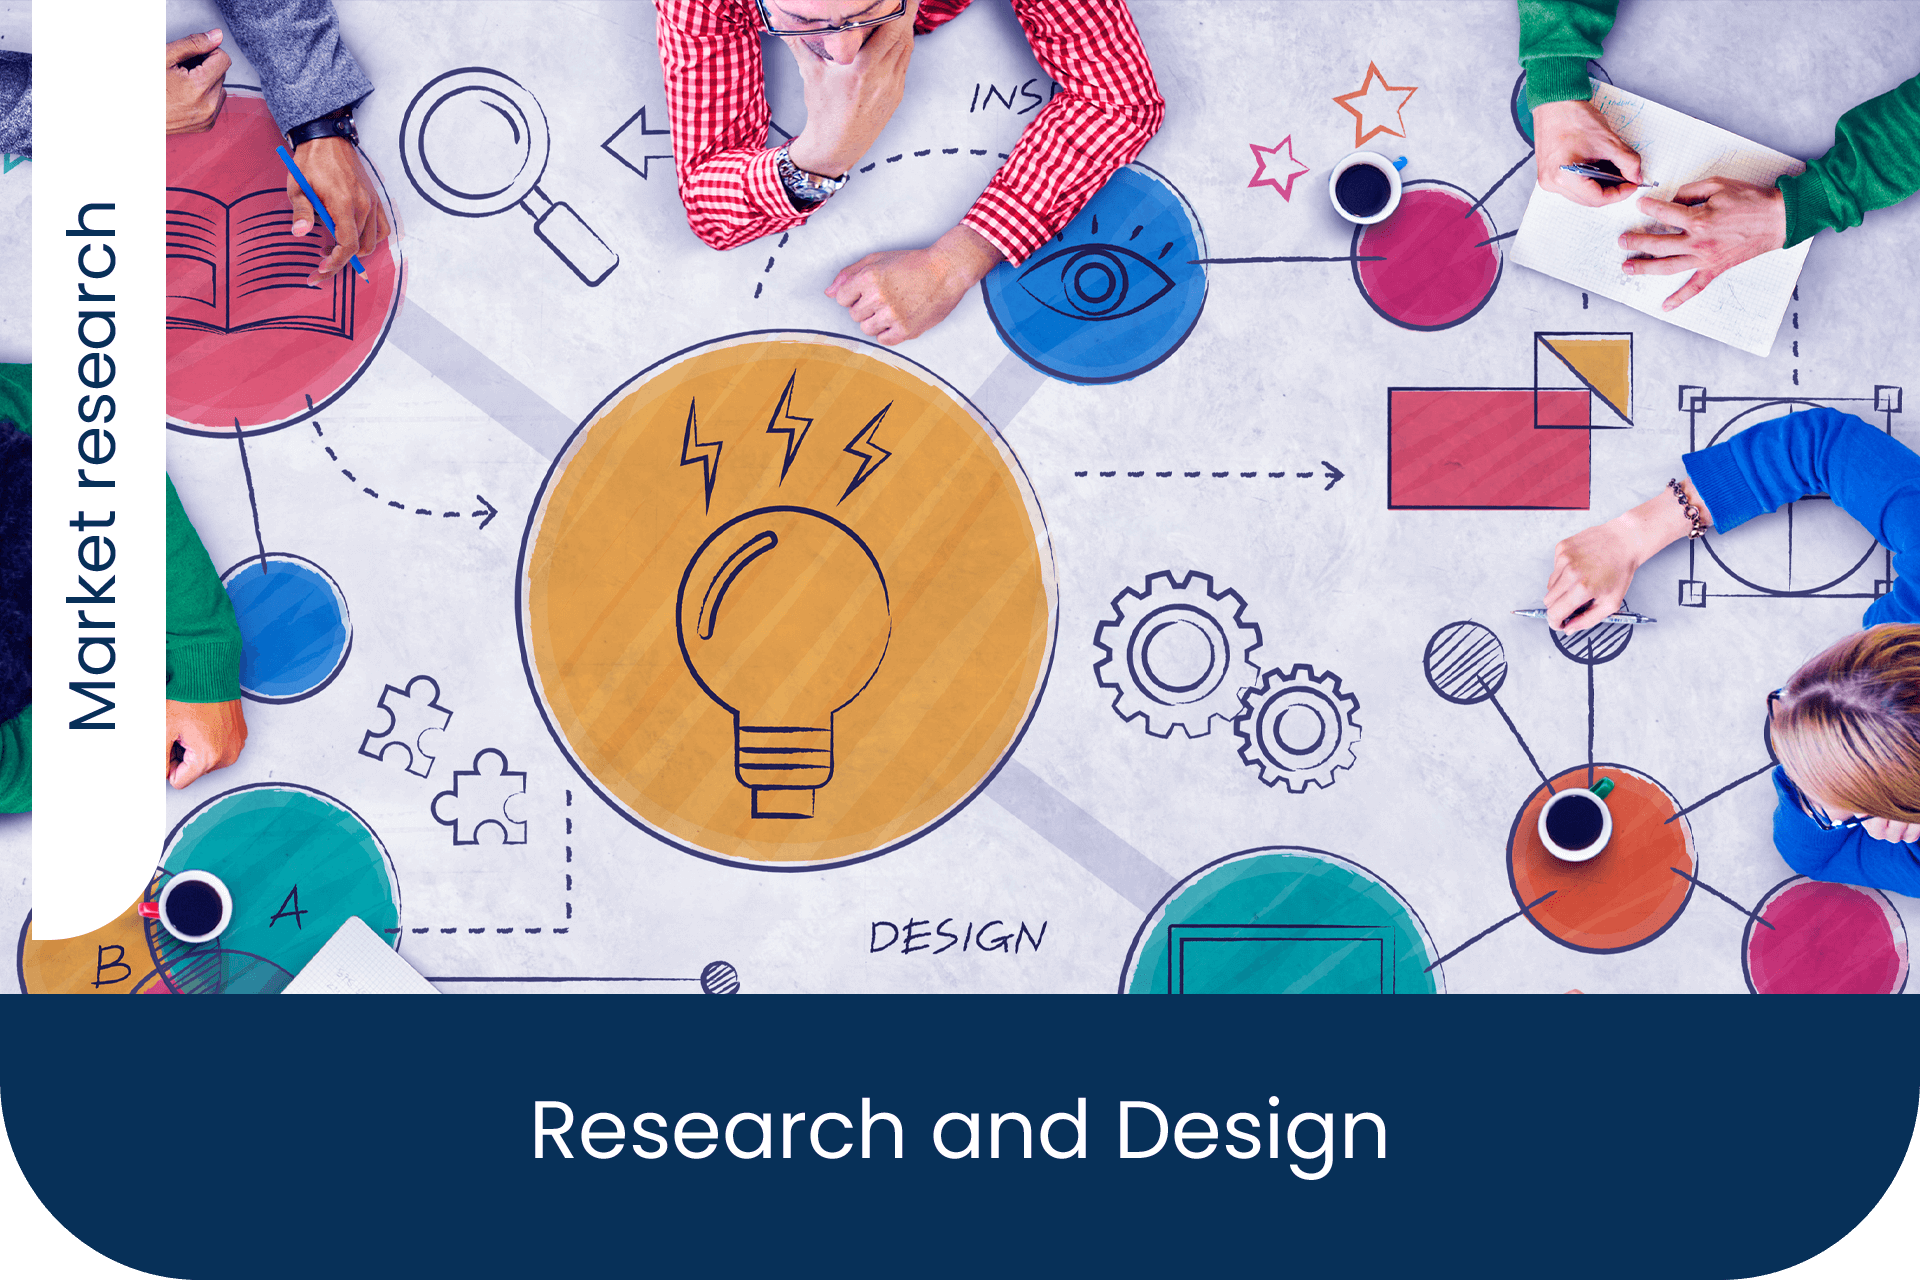 research and design courses